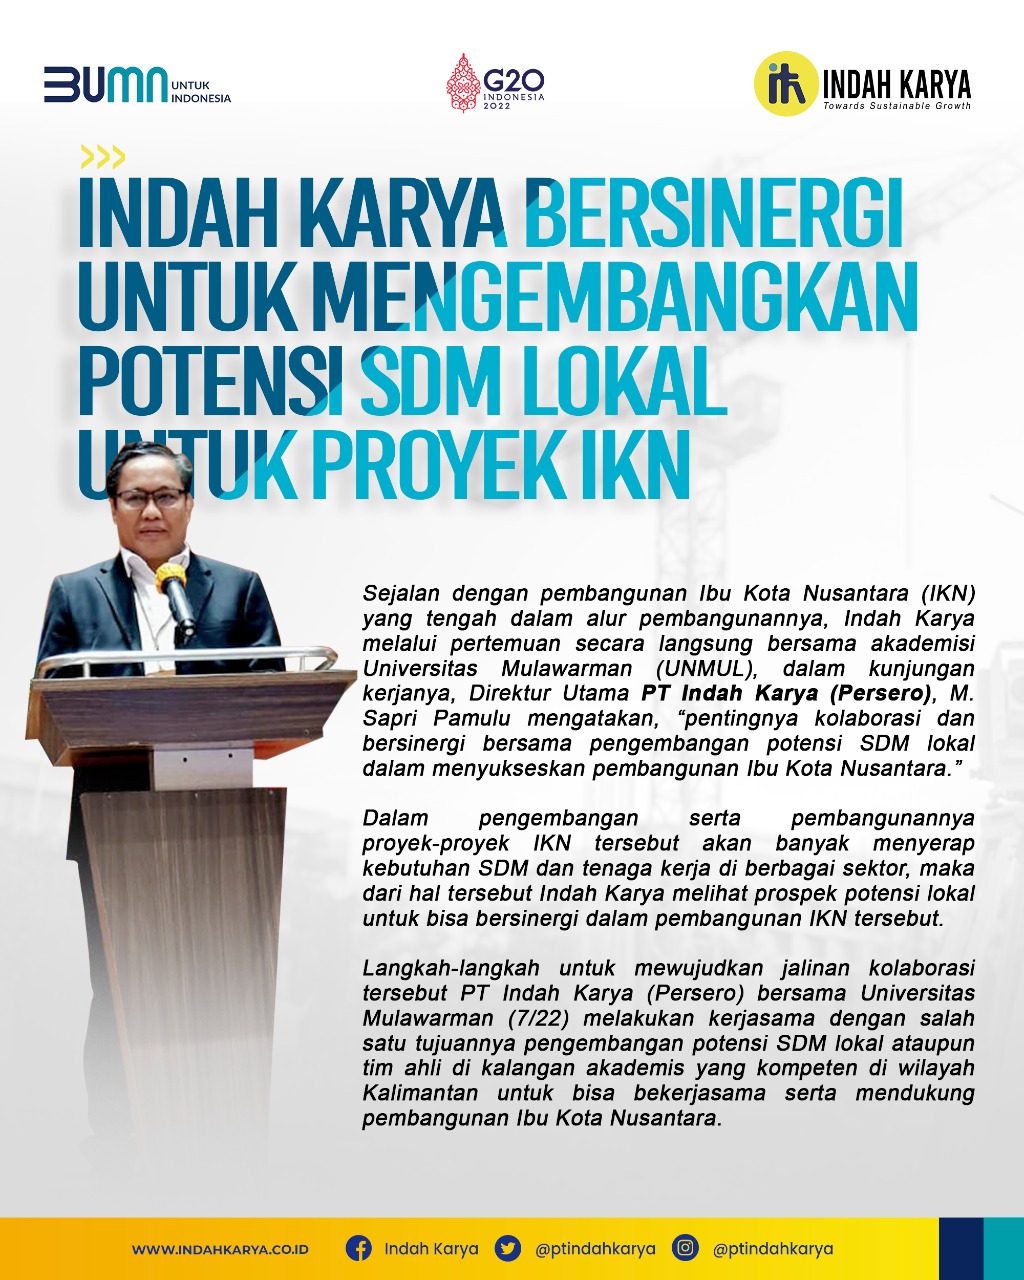 Indah Karya synergizes to develop the potential of local human resources for the IKN project